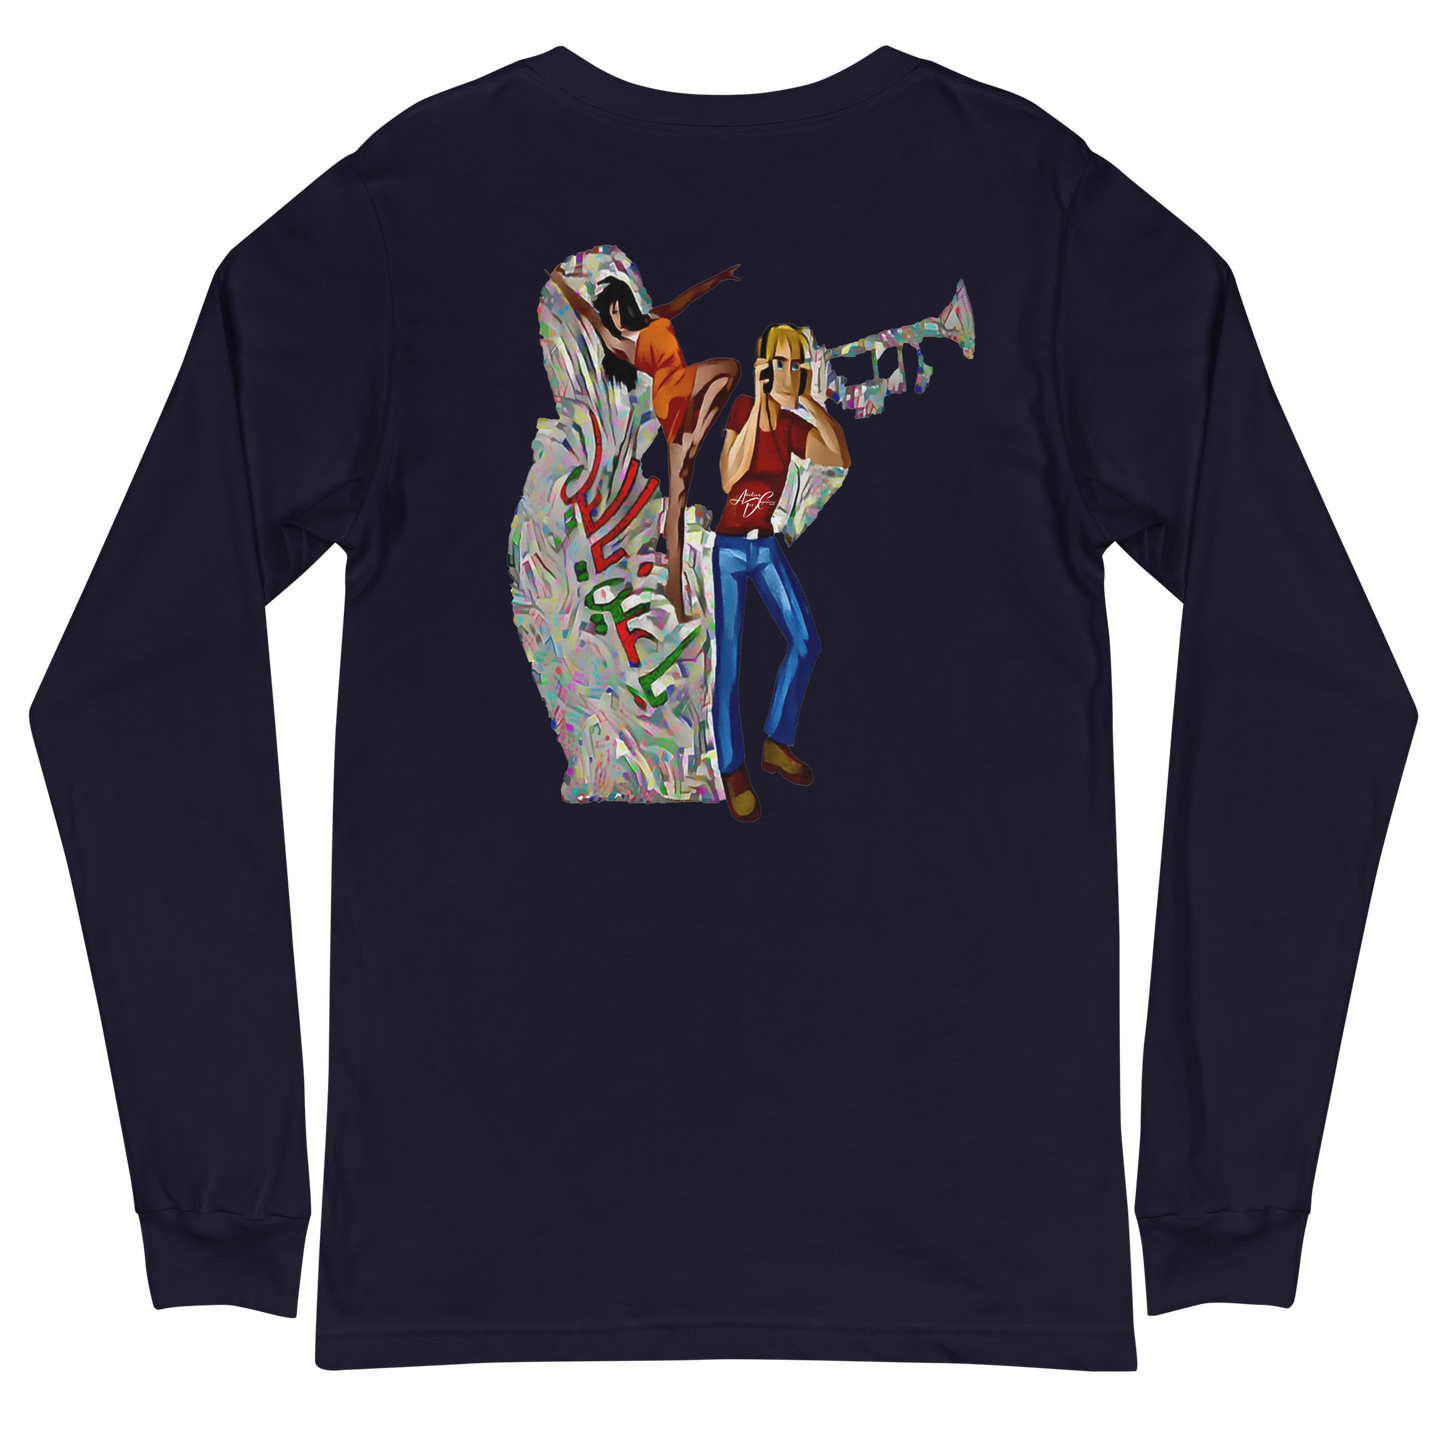 "Ya ein Ya leil" Artistic Unisex Long Sleeve Tee by Atelier Des Caprices - Comfort Meets Exclusive Design